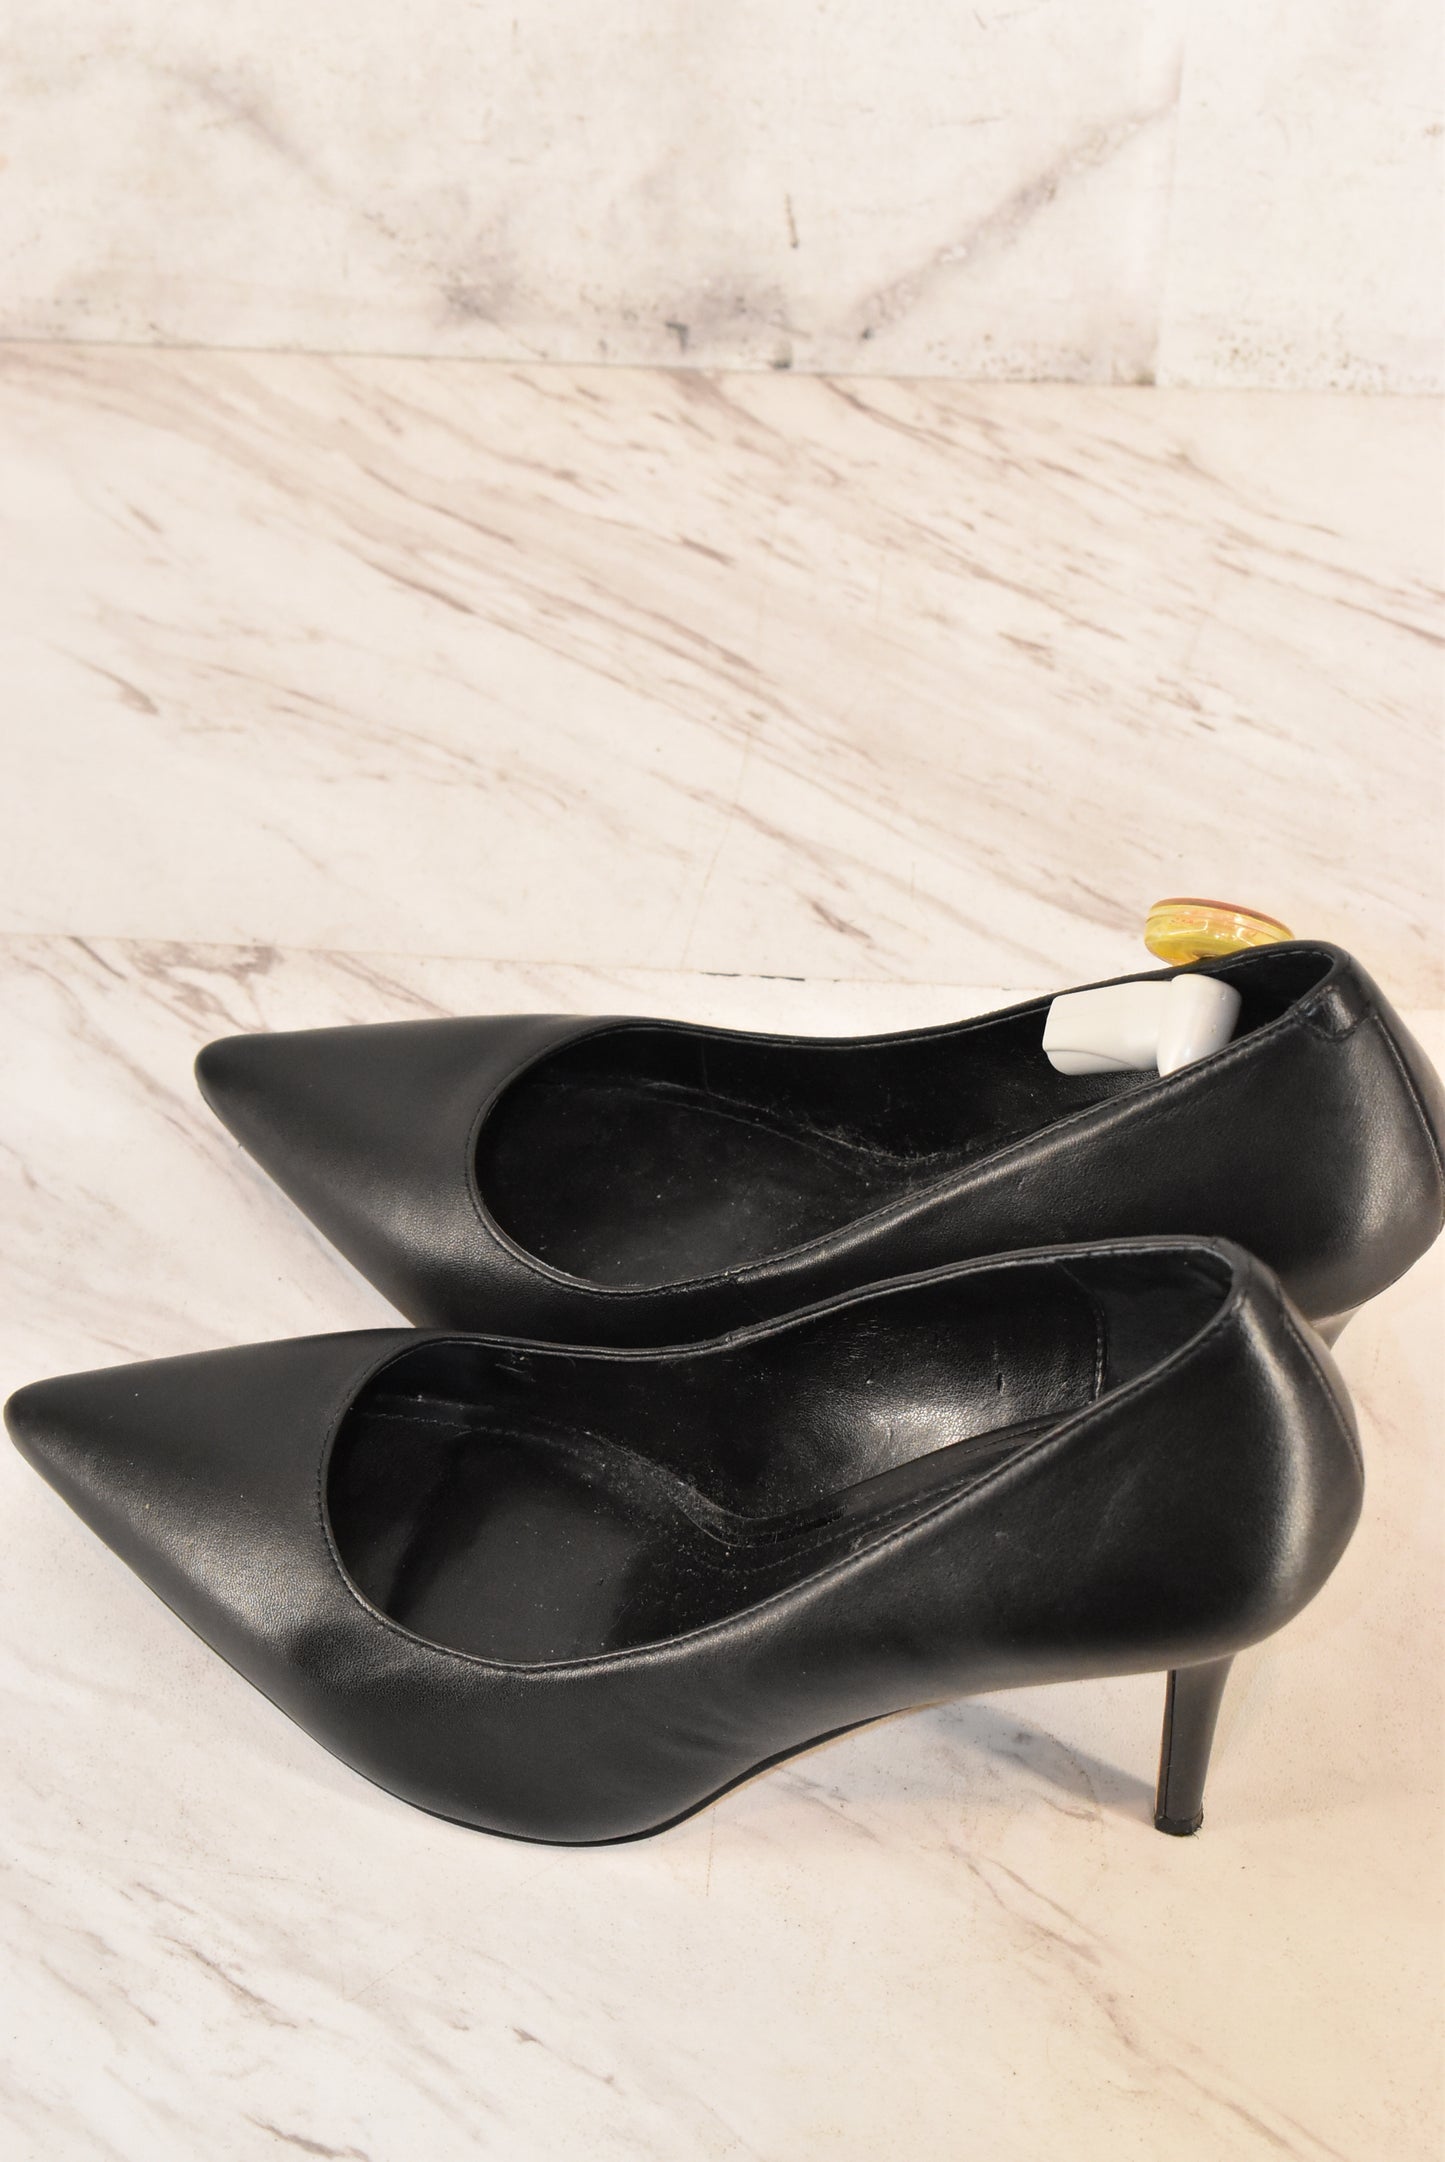 Shoes Heels Stiletto By White House Black Market  Size: 8